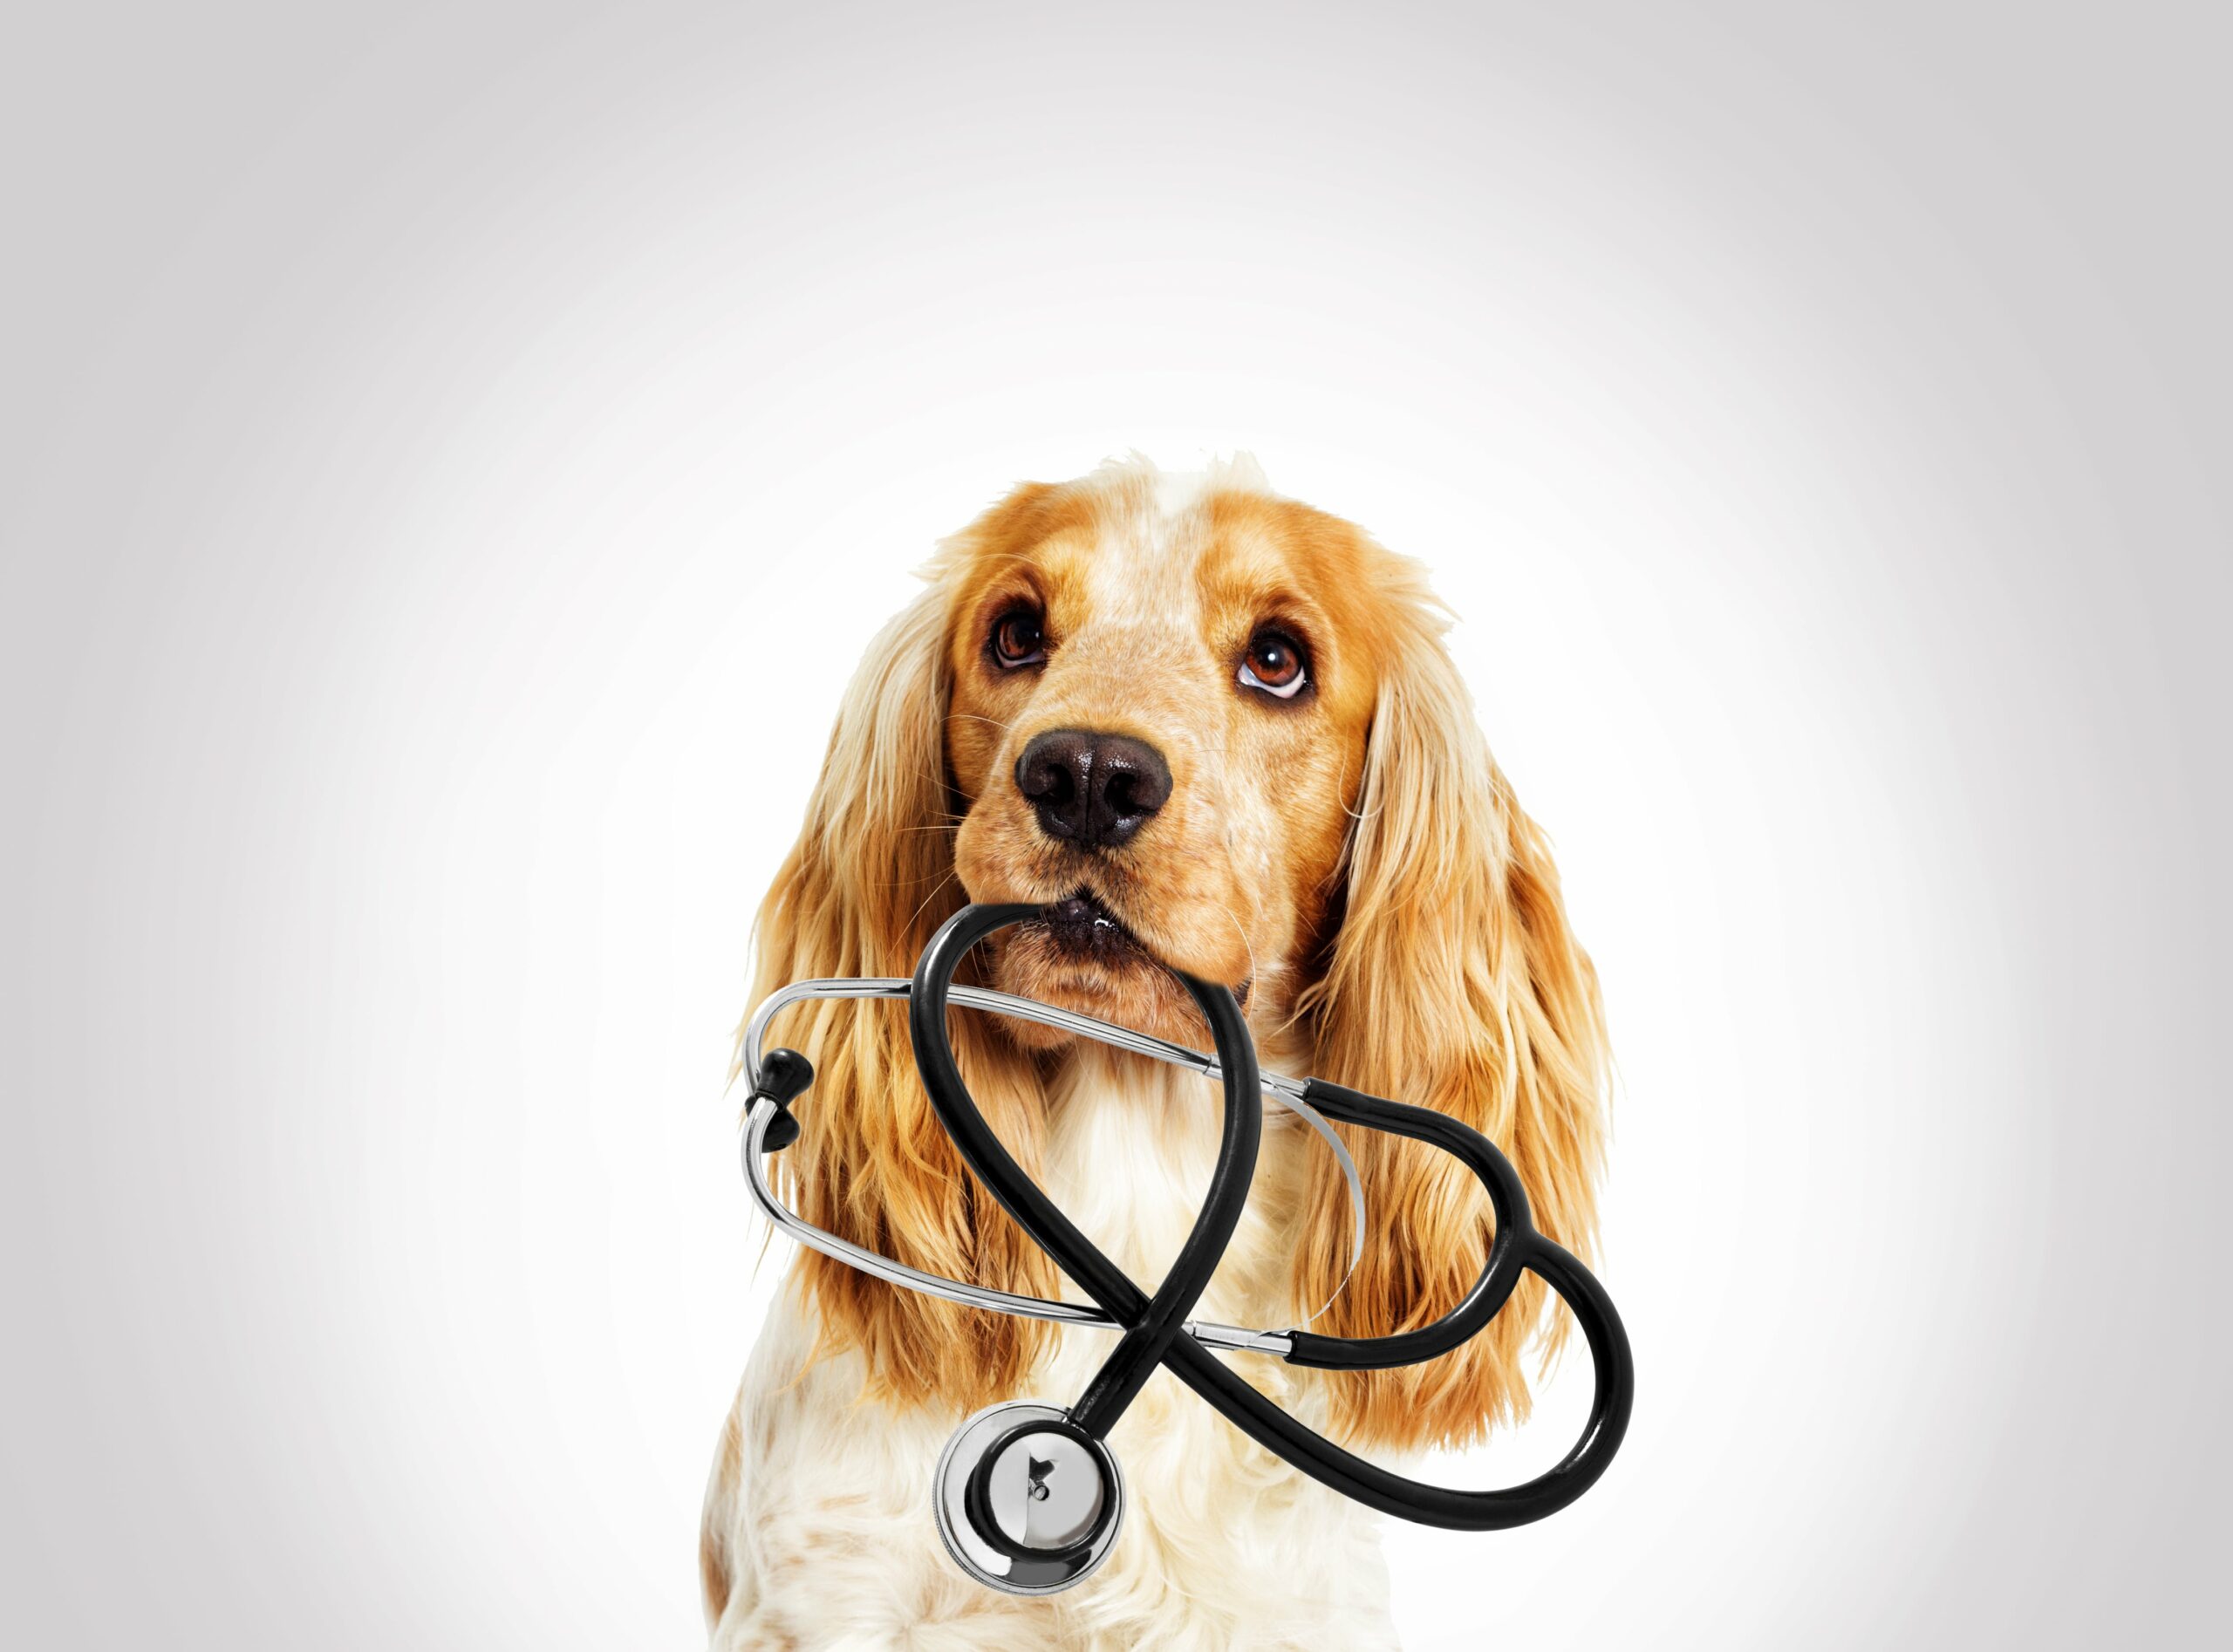 A dog bites a stetoscope while looking above